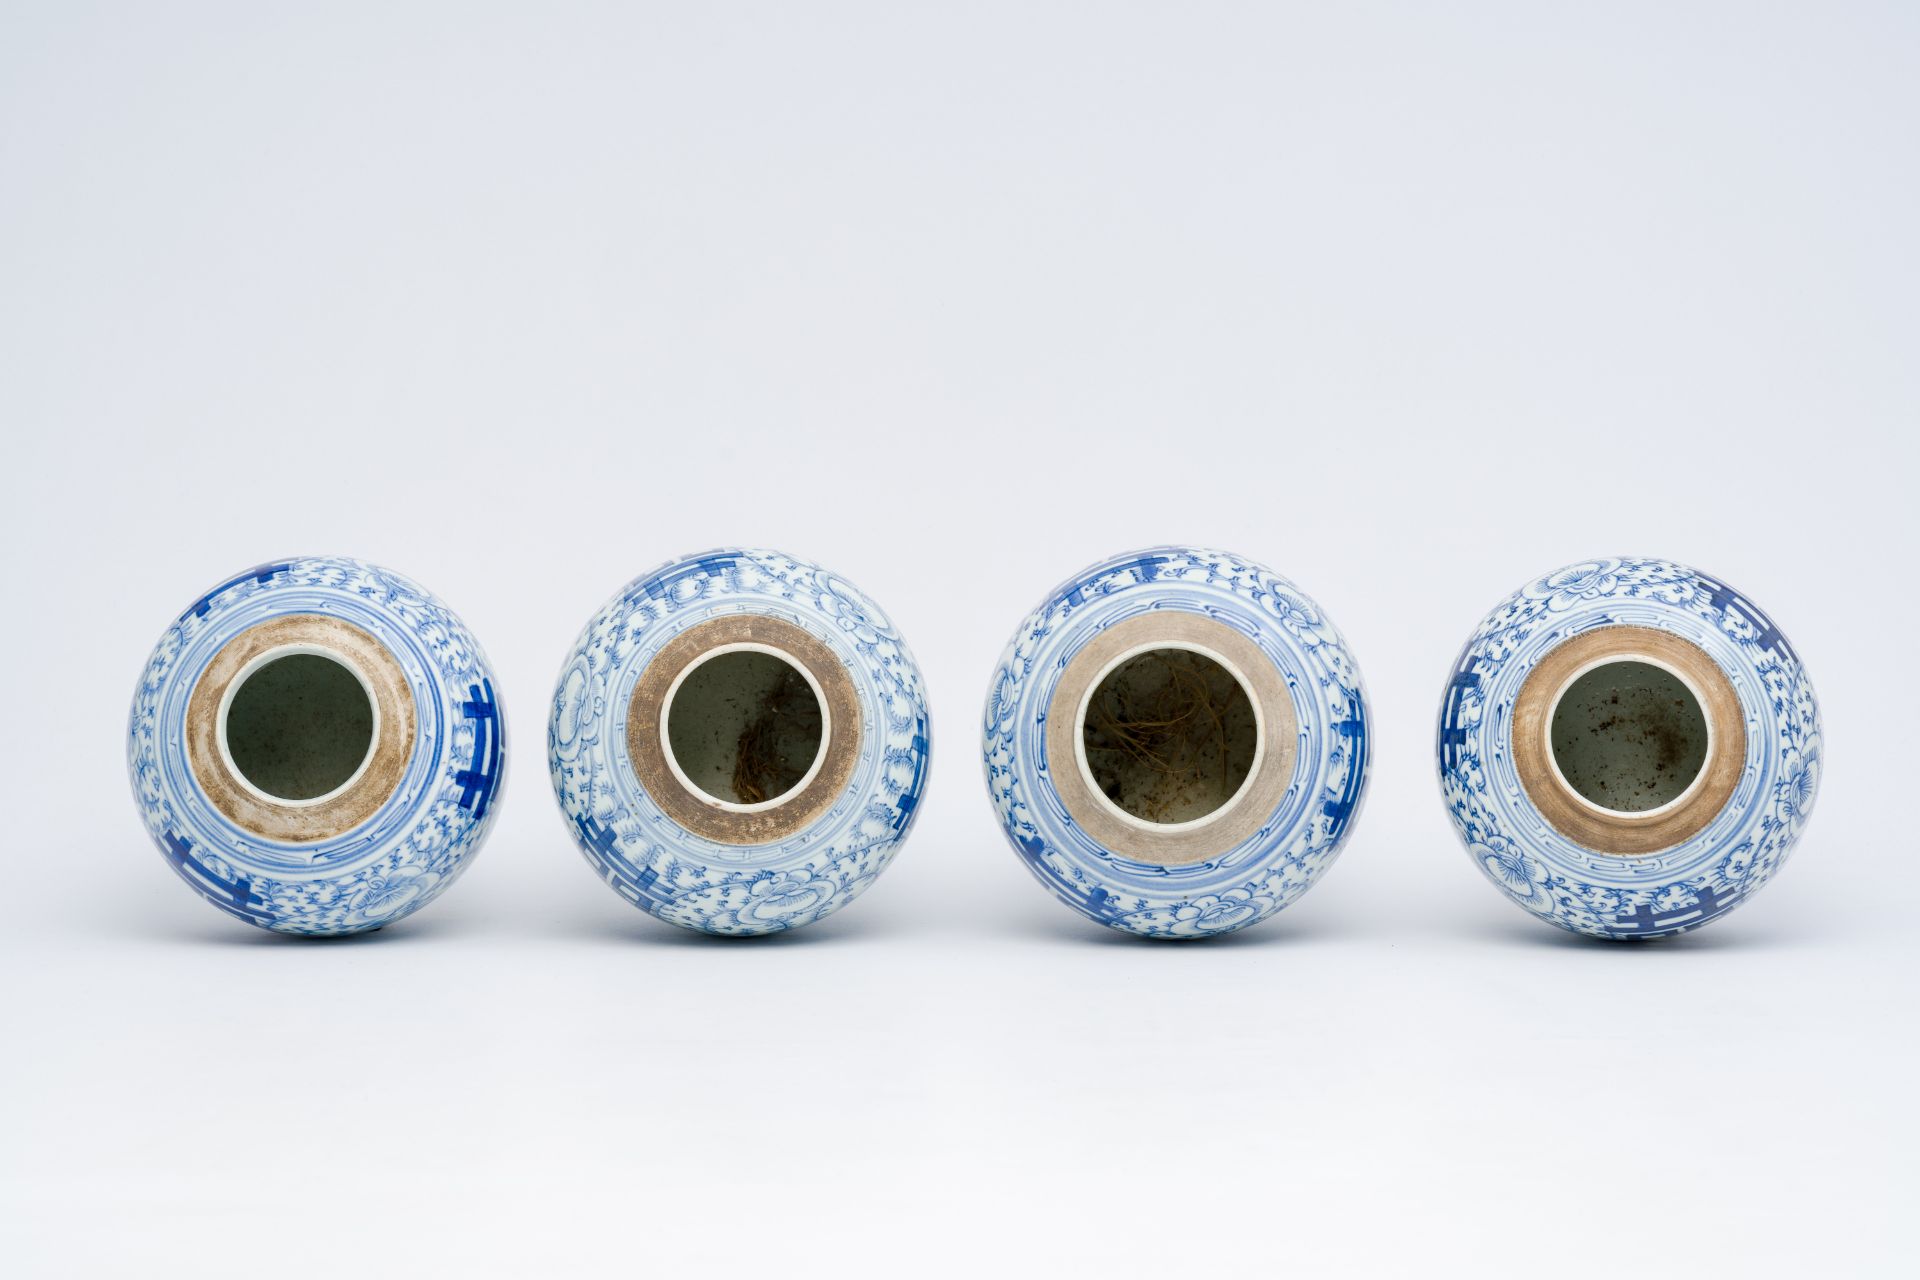 Eight Chinese blue and white ginger jars with 'Xi' and floral design, 19th/20th C. - Image 25 of 28